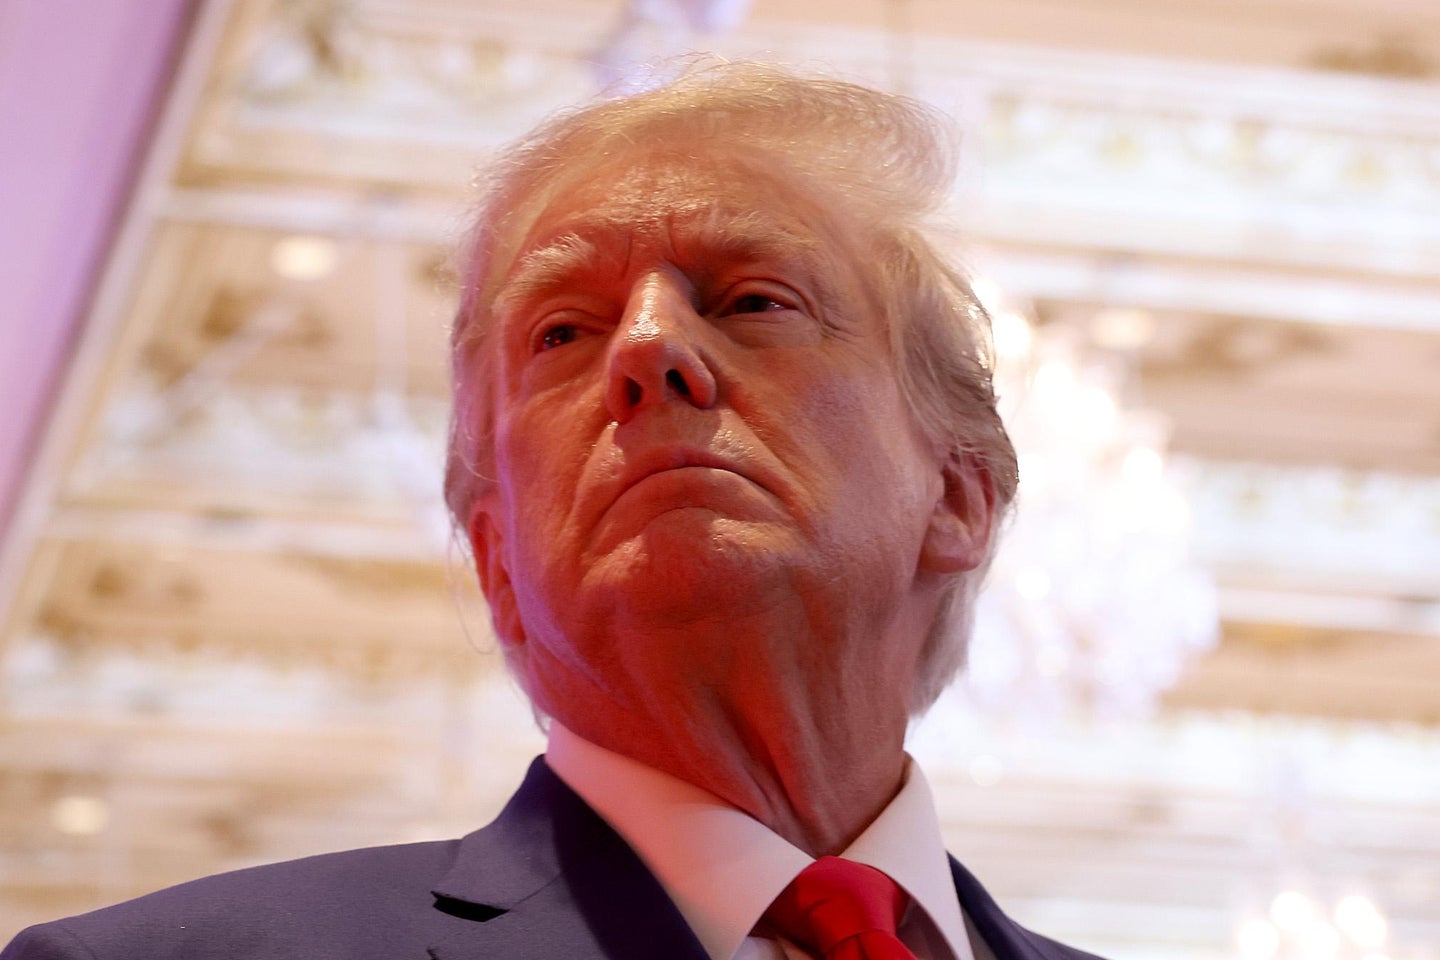 The Latest Mar-a-Lago Hearing Went Badly for Donald Trump. Here’s Why Things Are Likely to Get Much Worse Very Quickly. (slate.com)